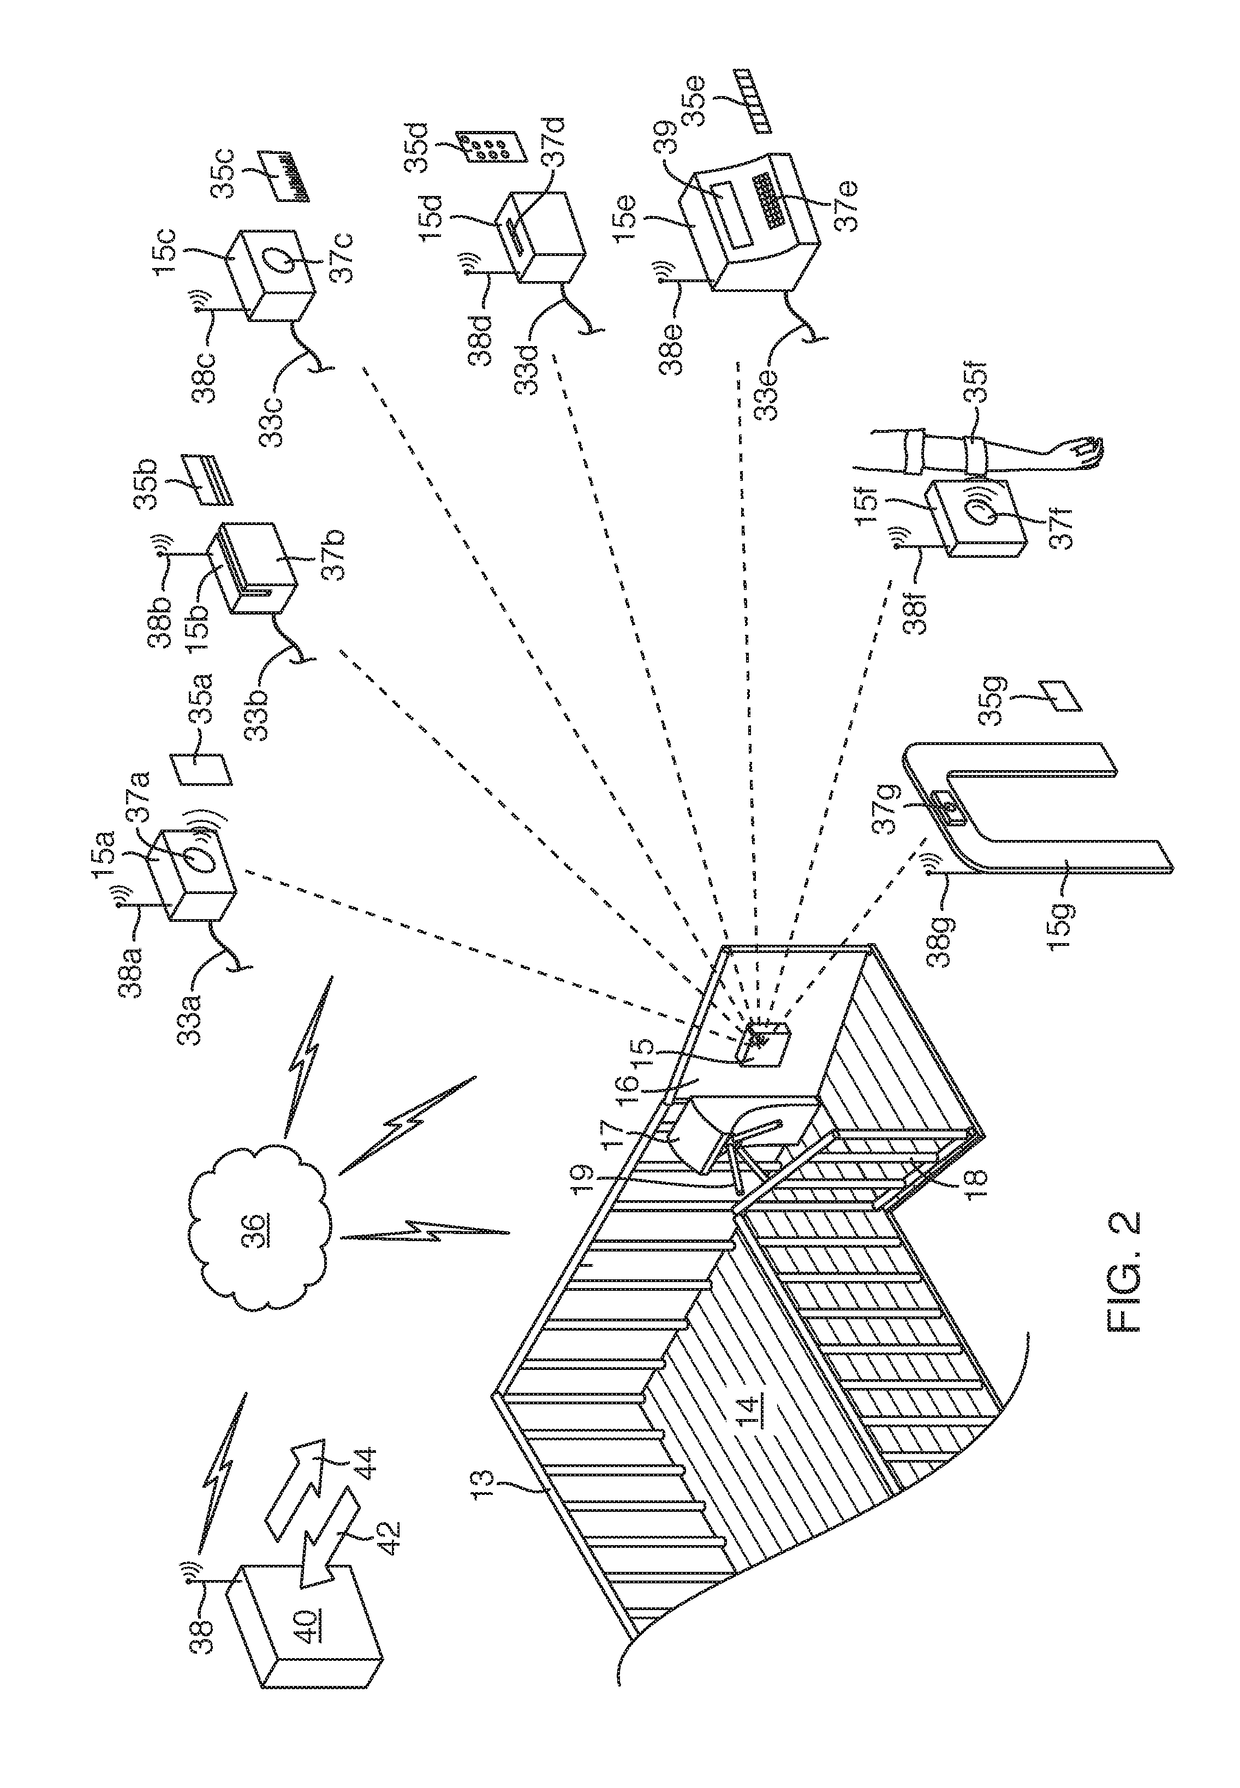 Tandem-trolley, zip-line system and method